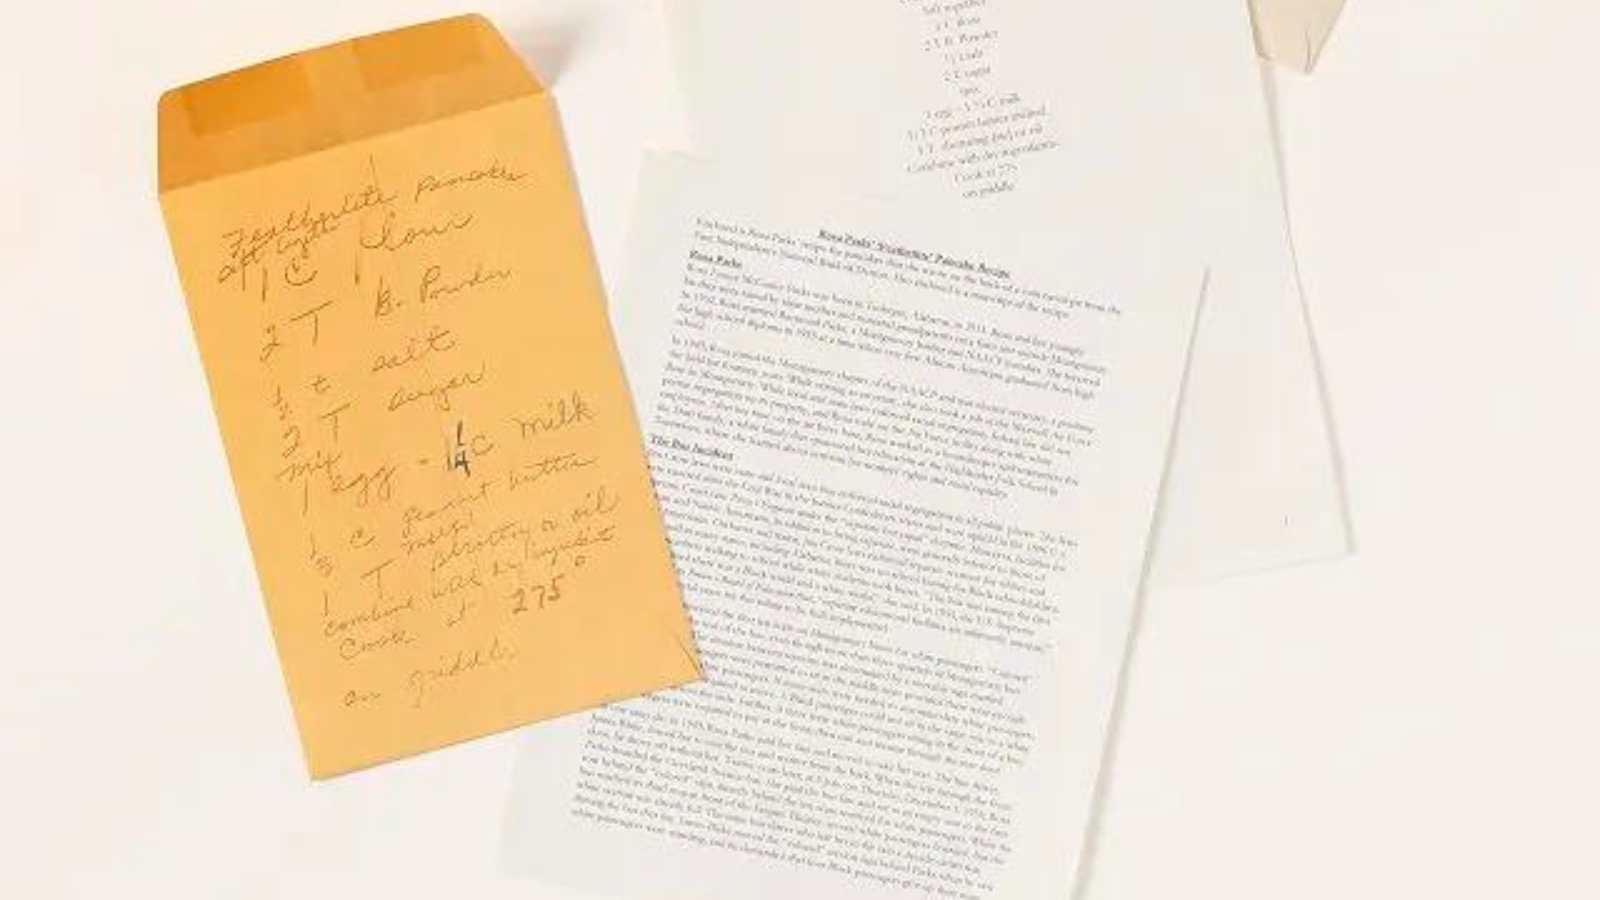 paper of handwritten recipes from famous figures such as George Washington, Emily Dickinson, and Rosa Parks